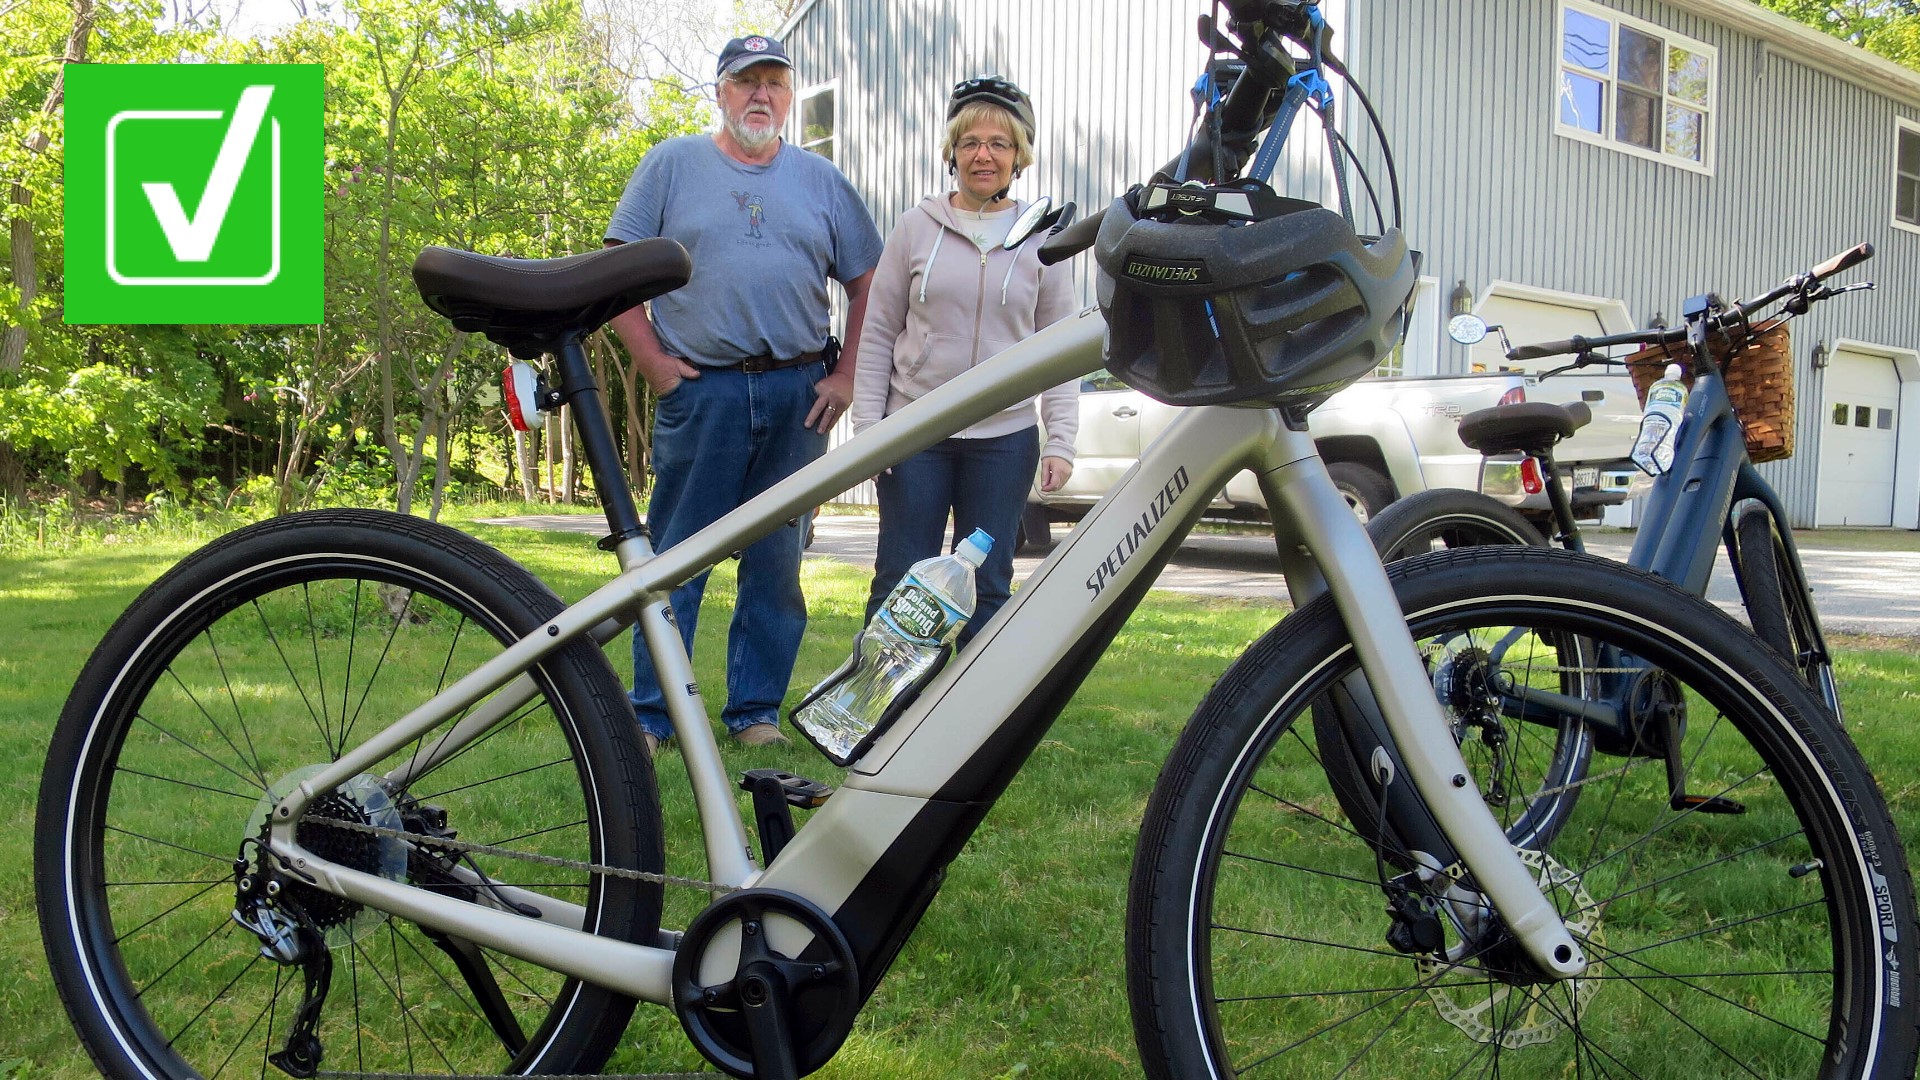 Electric vehicle sales have been increasing for years, but an 11Alive viewer asked us to verify if electric bicycle sales have grown even faster.